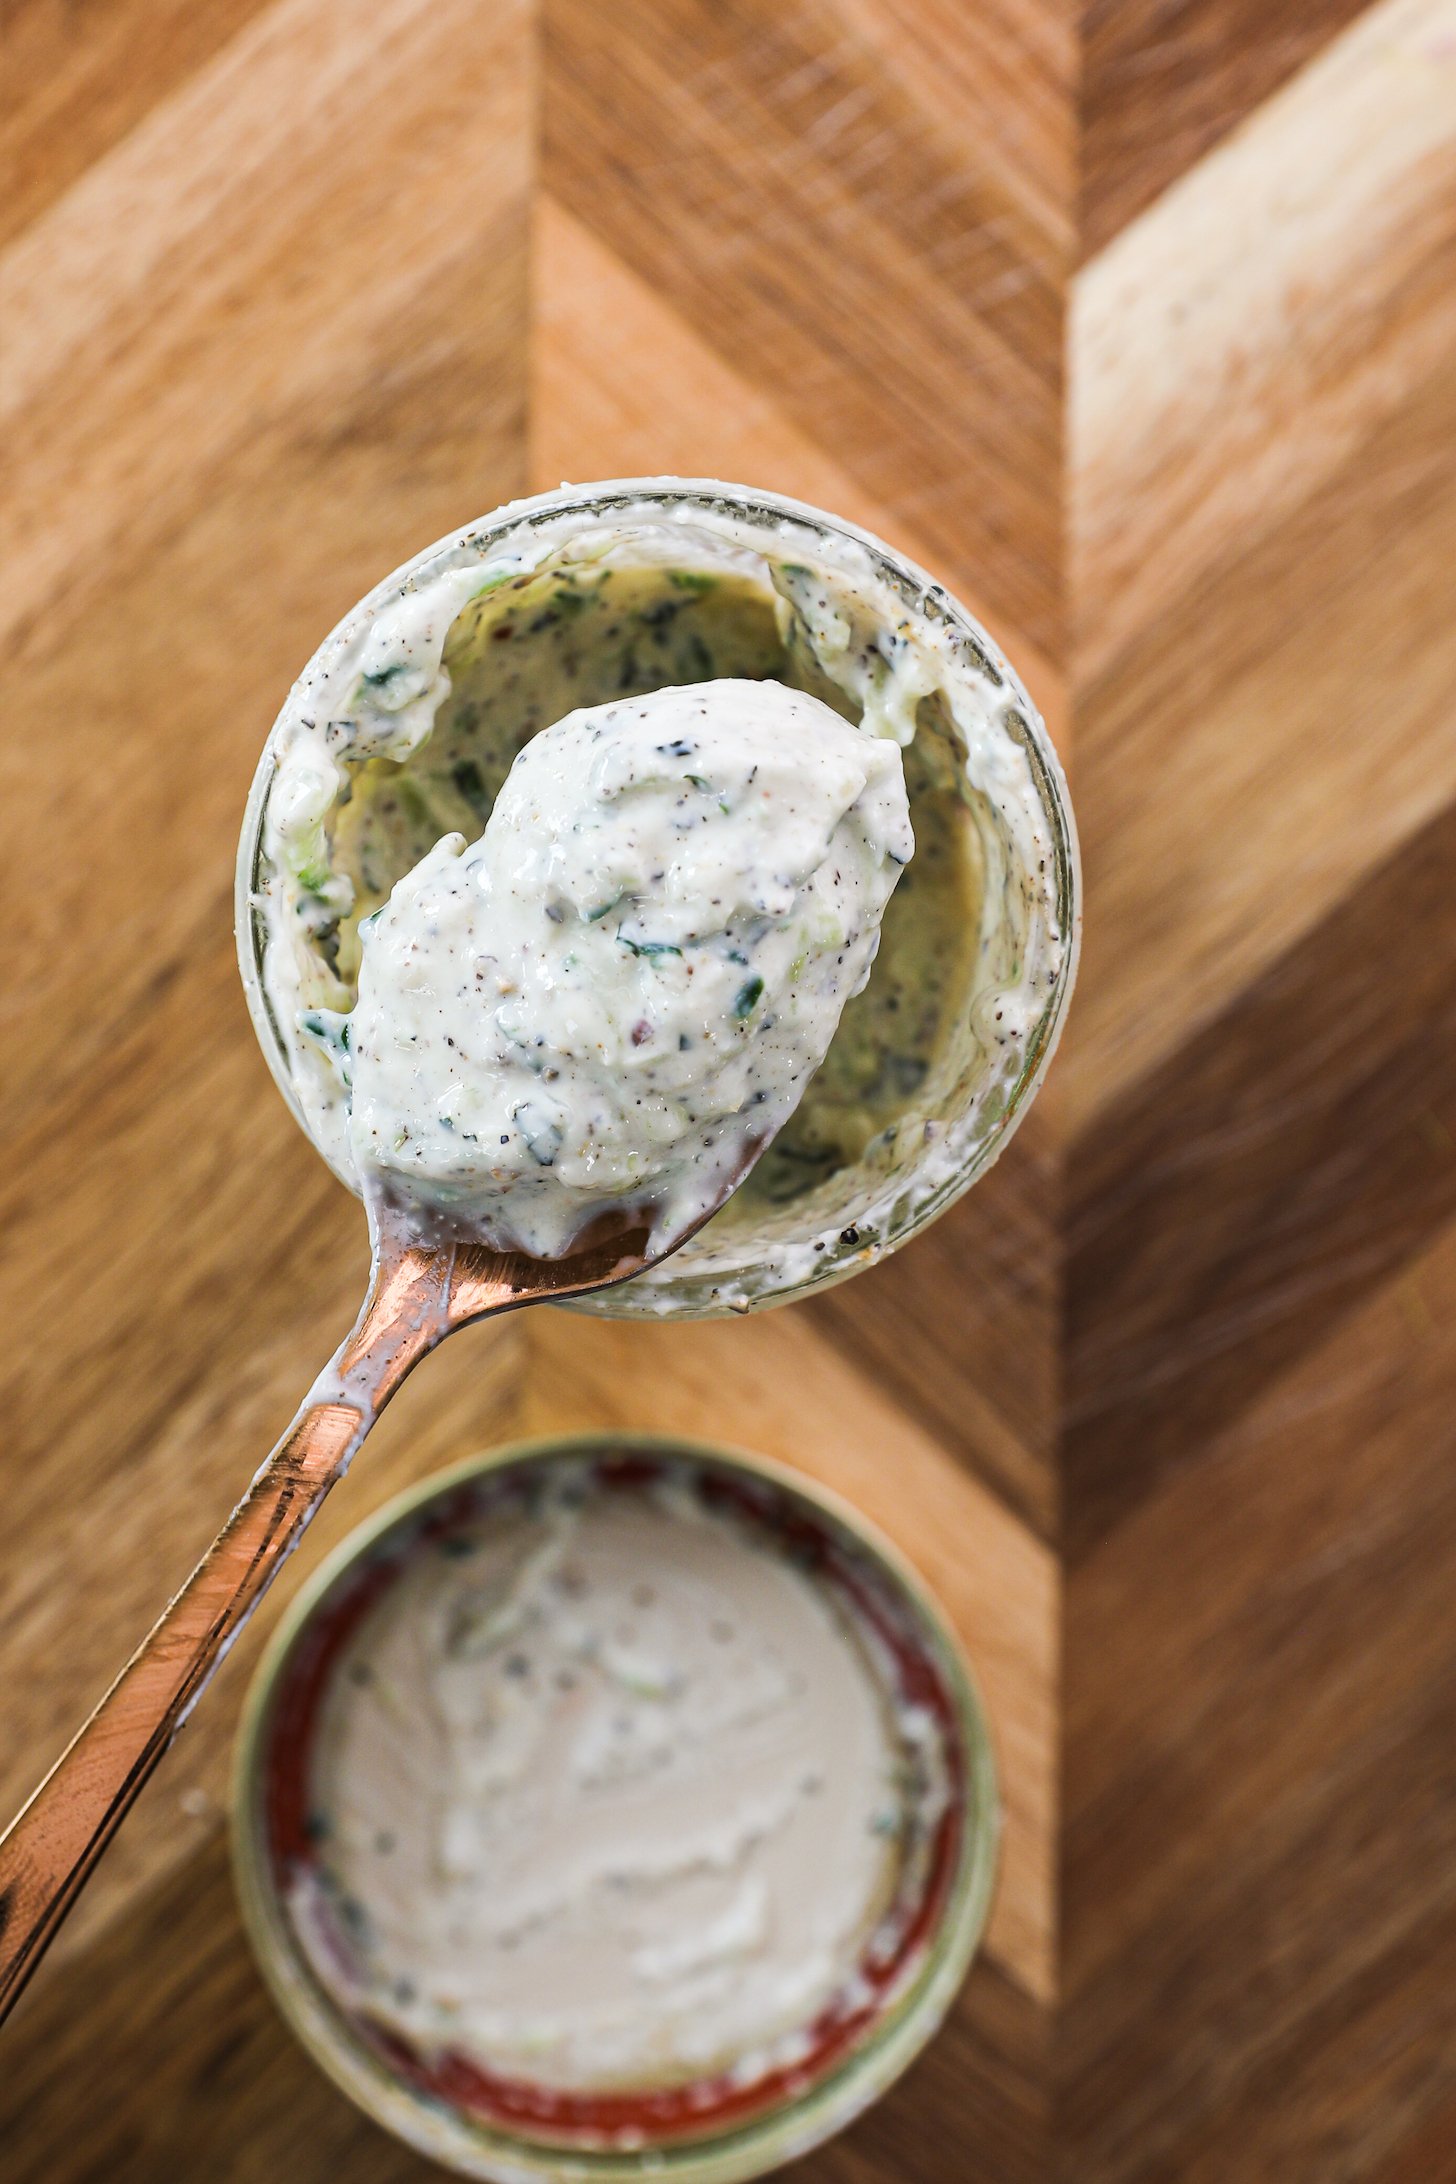 Top view of a gold spoonful of a yogurt sauce dotted with cucumber and spices.